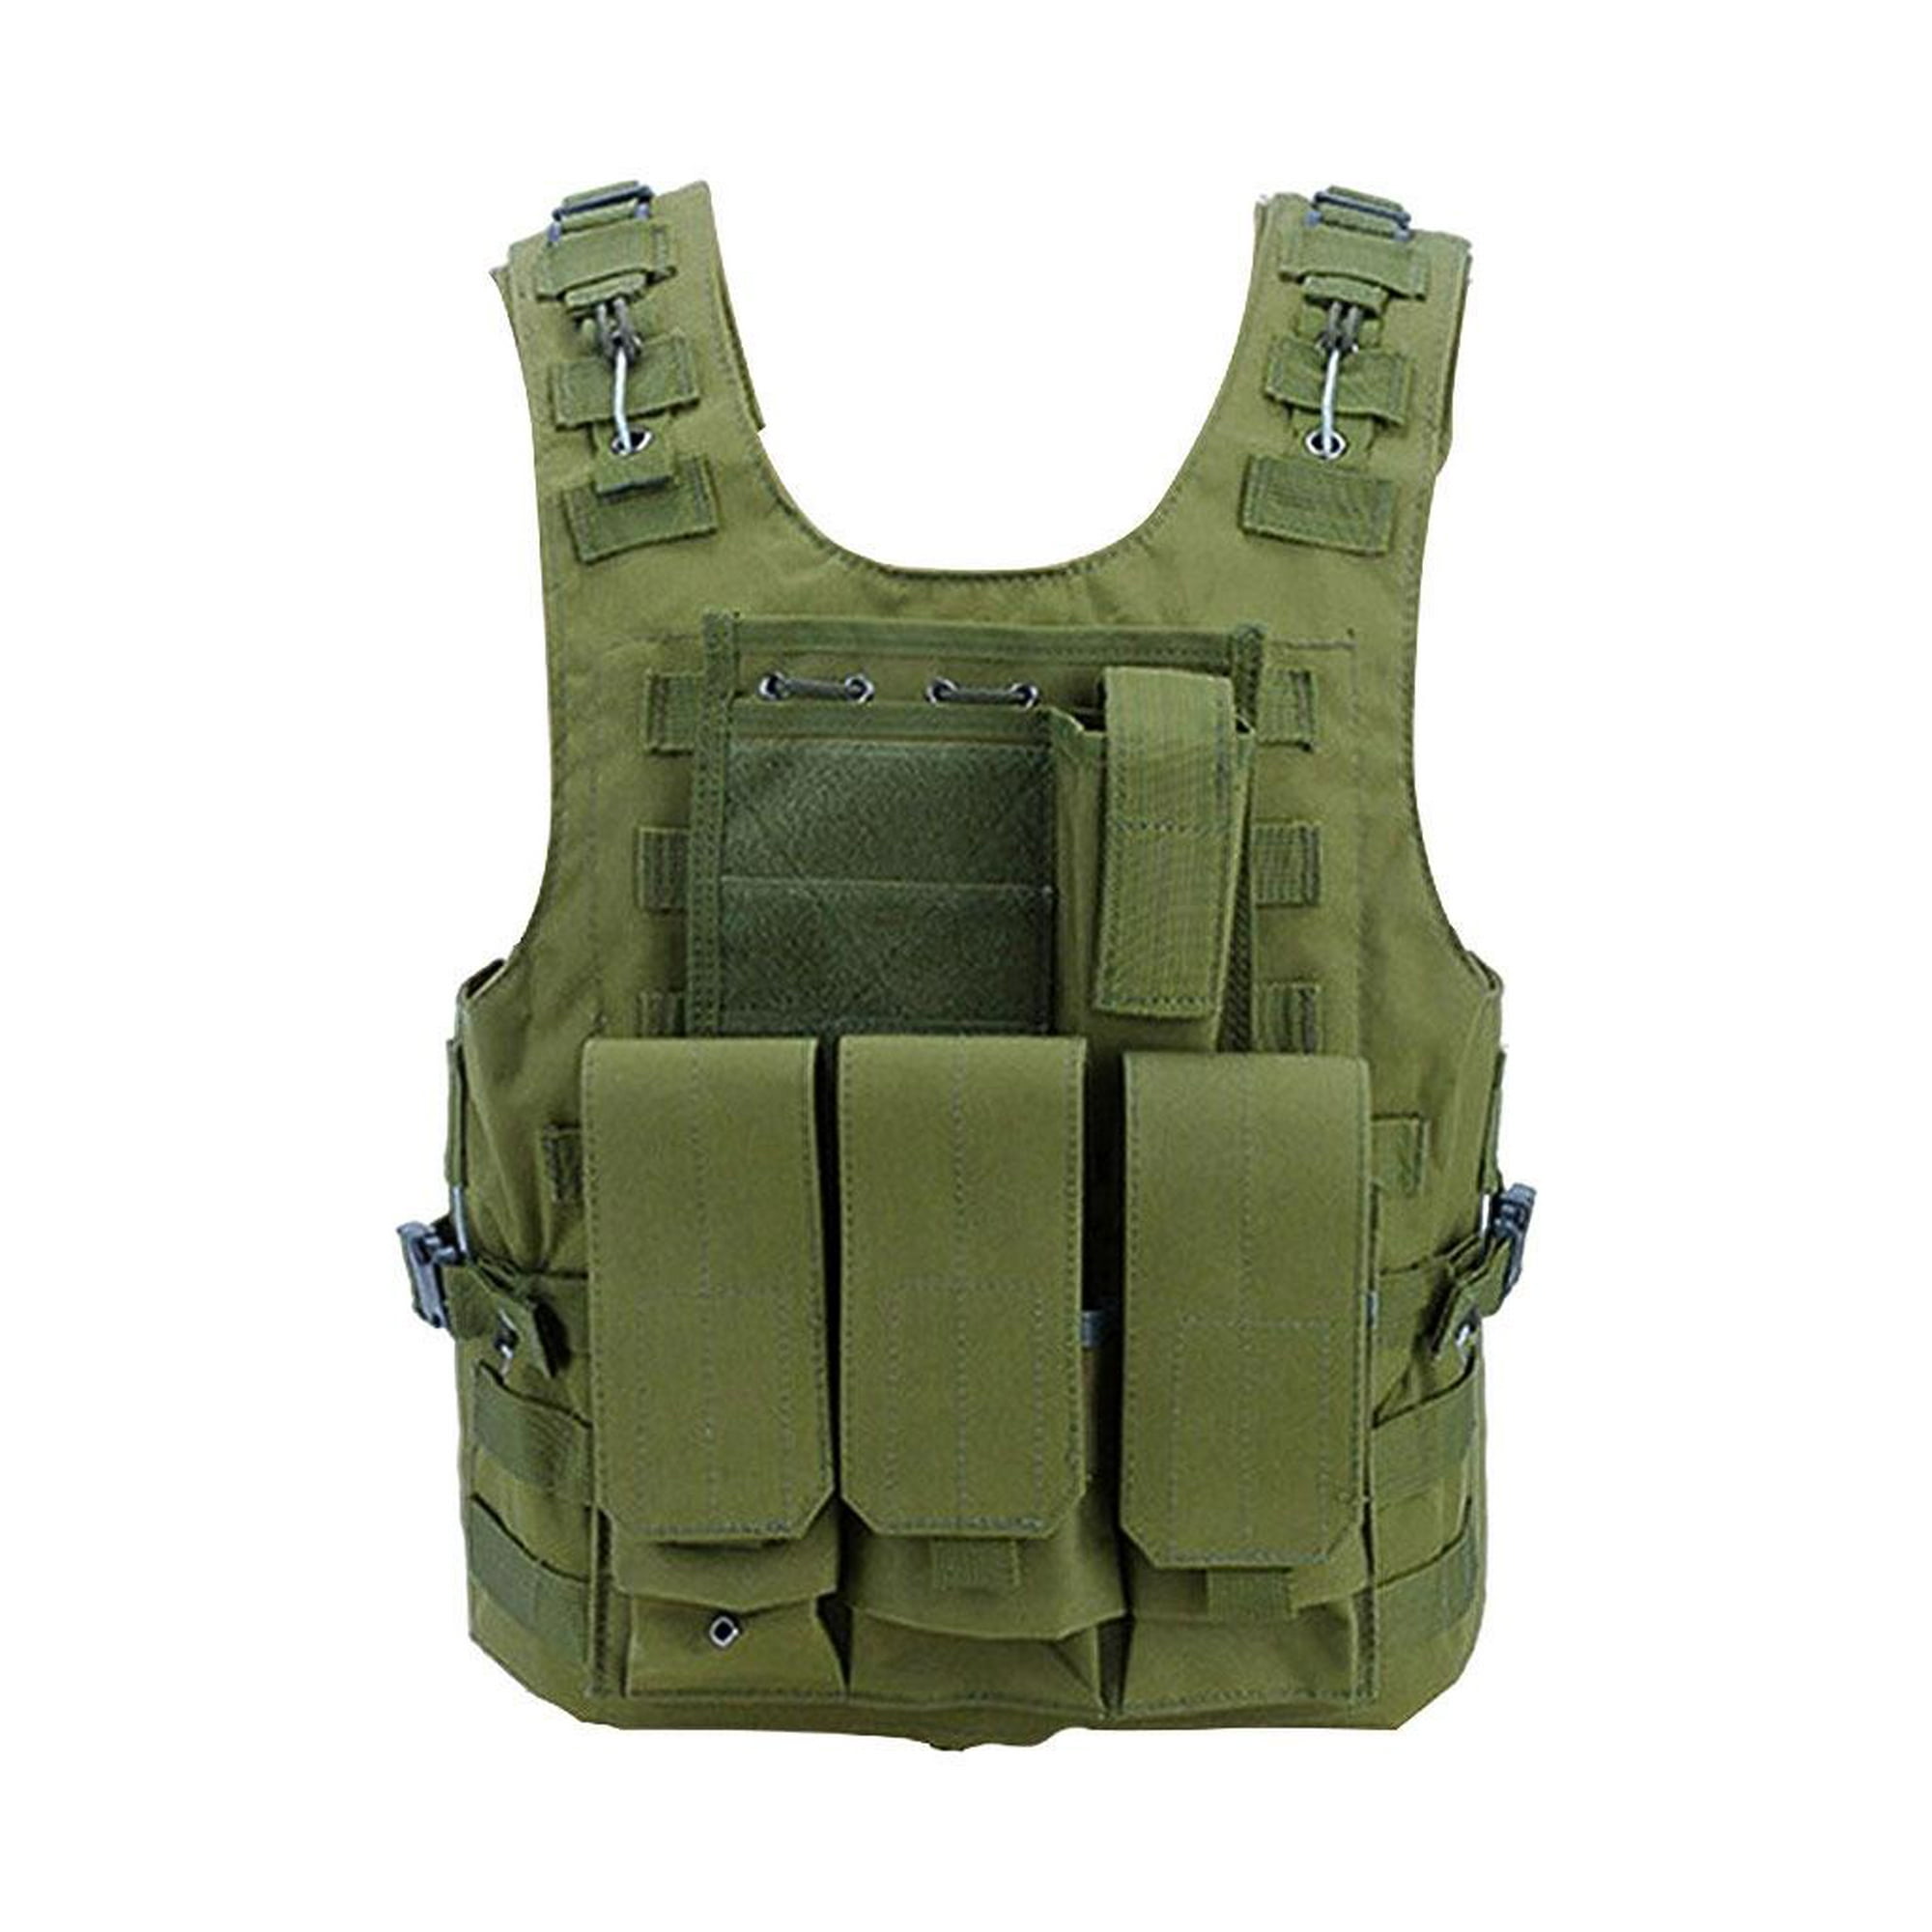 Chaleco verde para mujer Terrain Insulated Vest